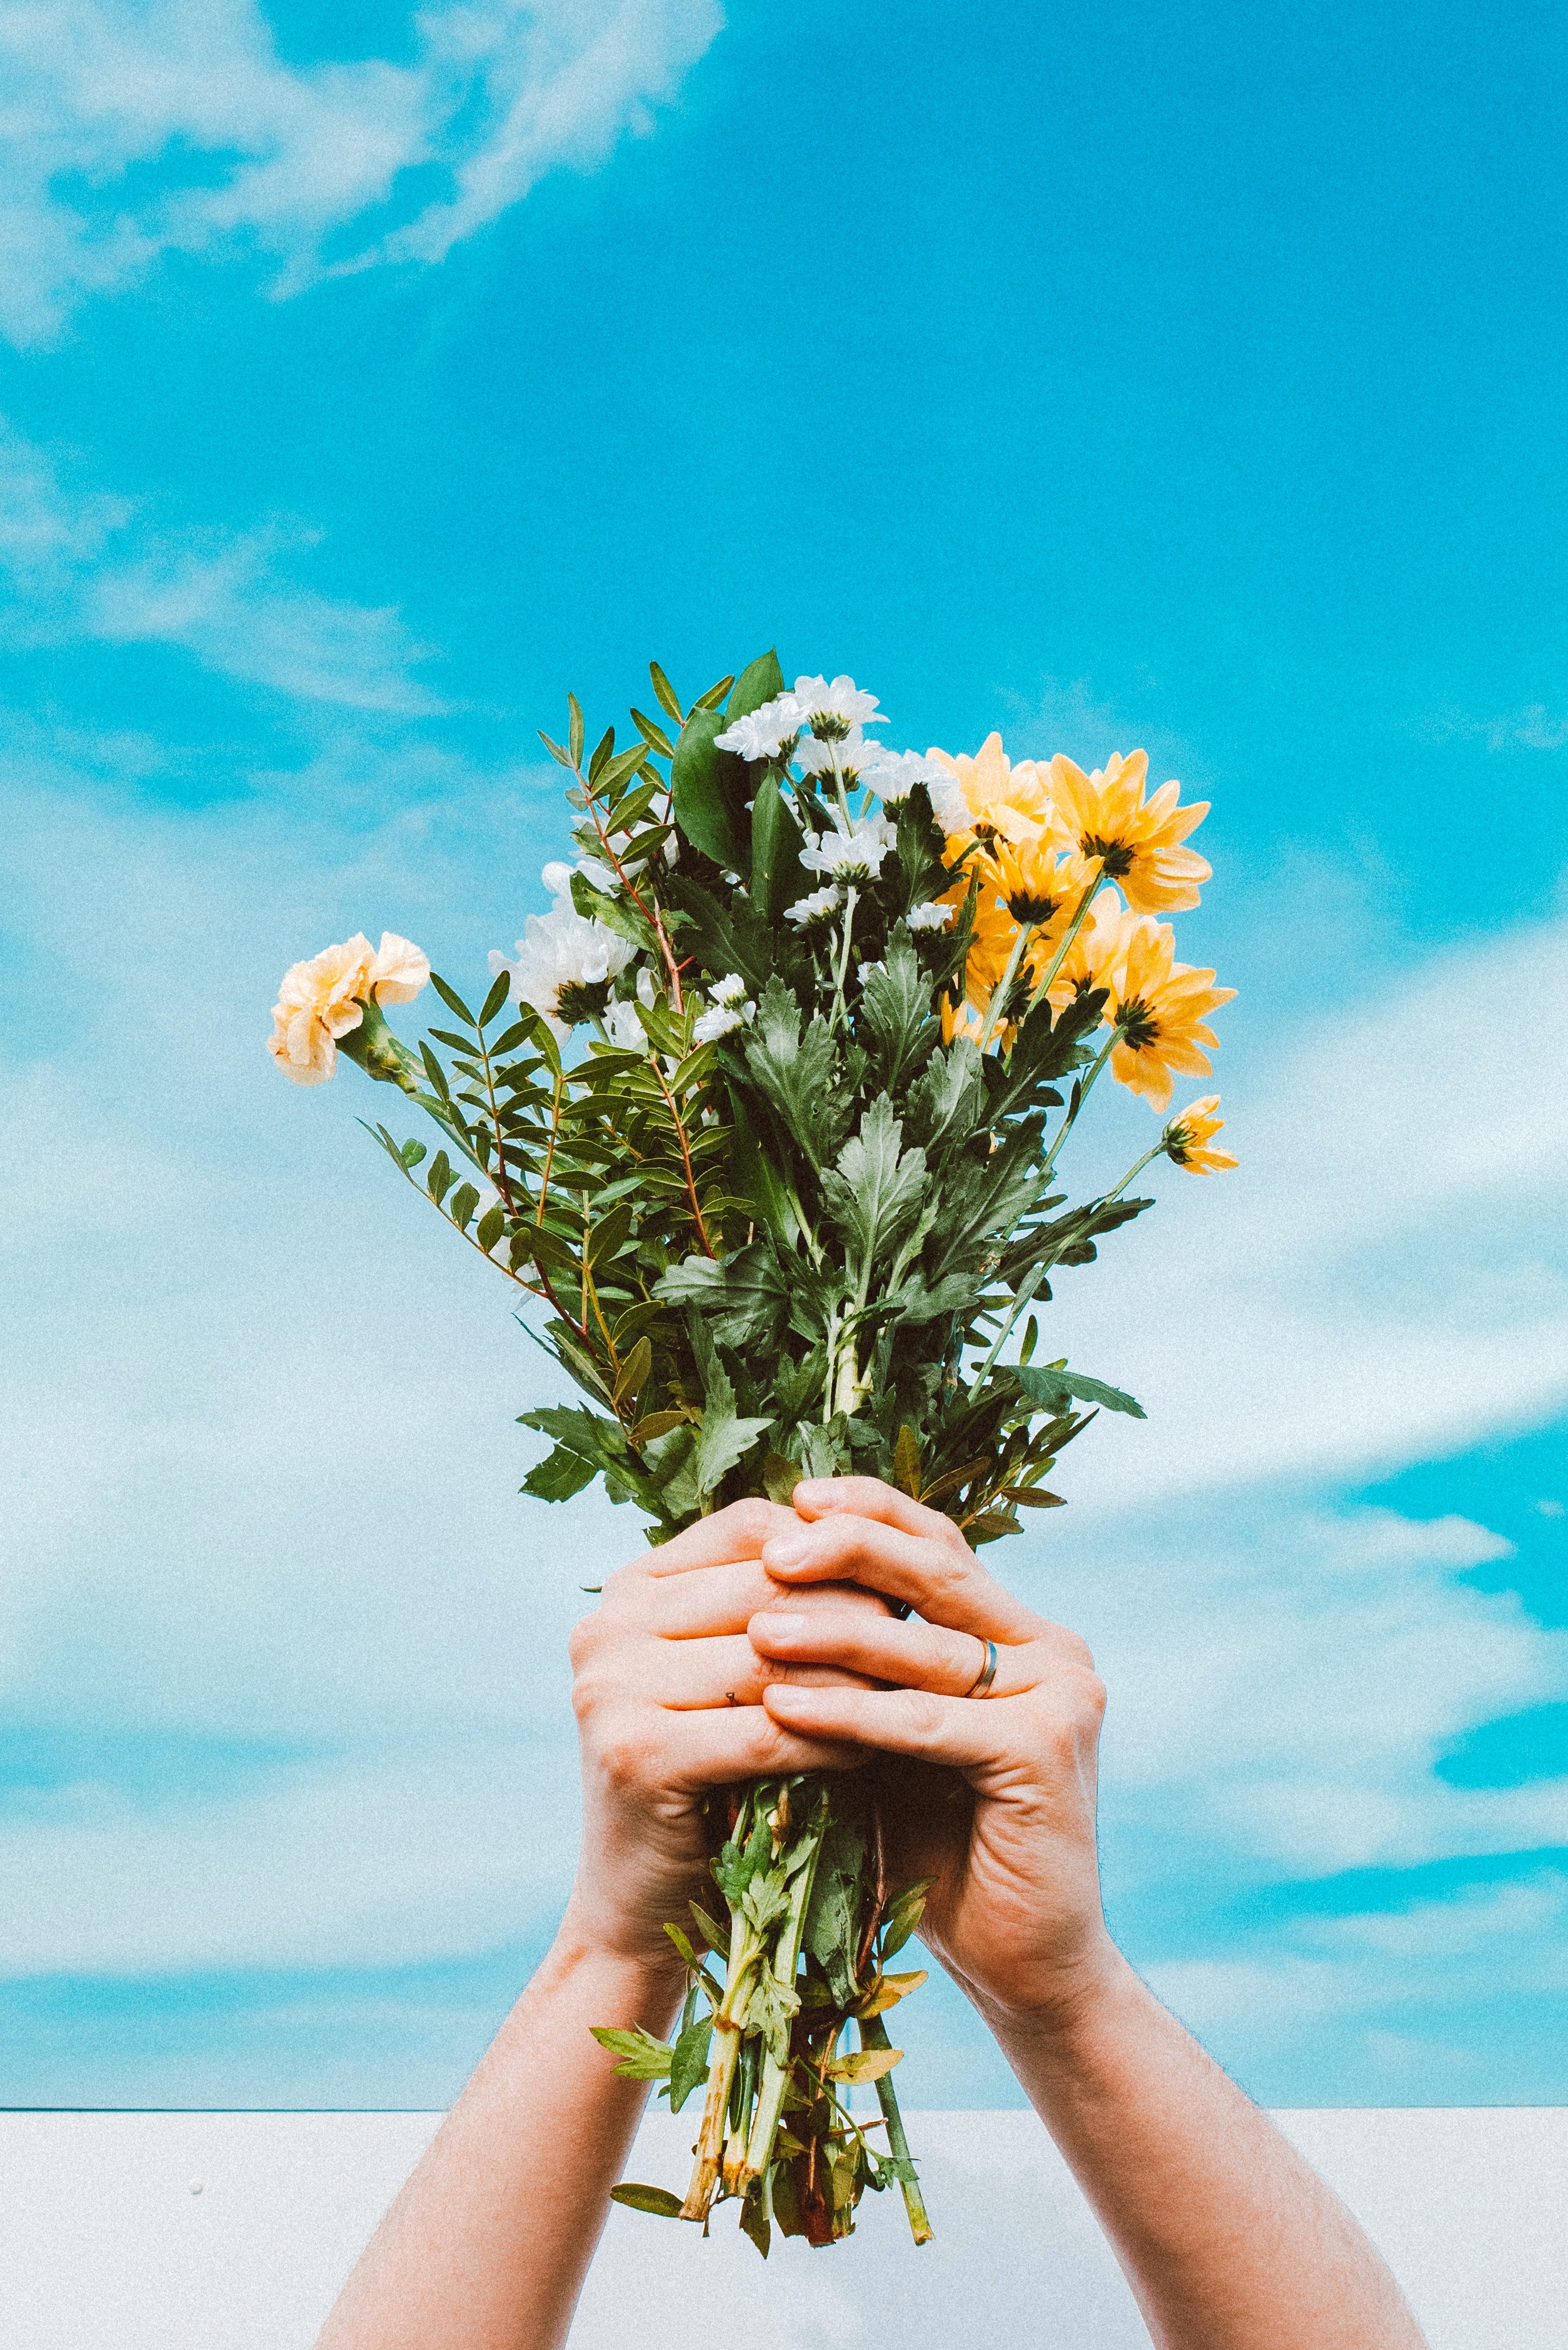 The old lady sold flowers to those passing by. | Source: Pexels